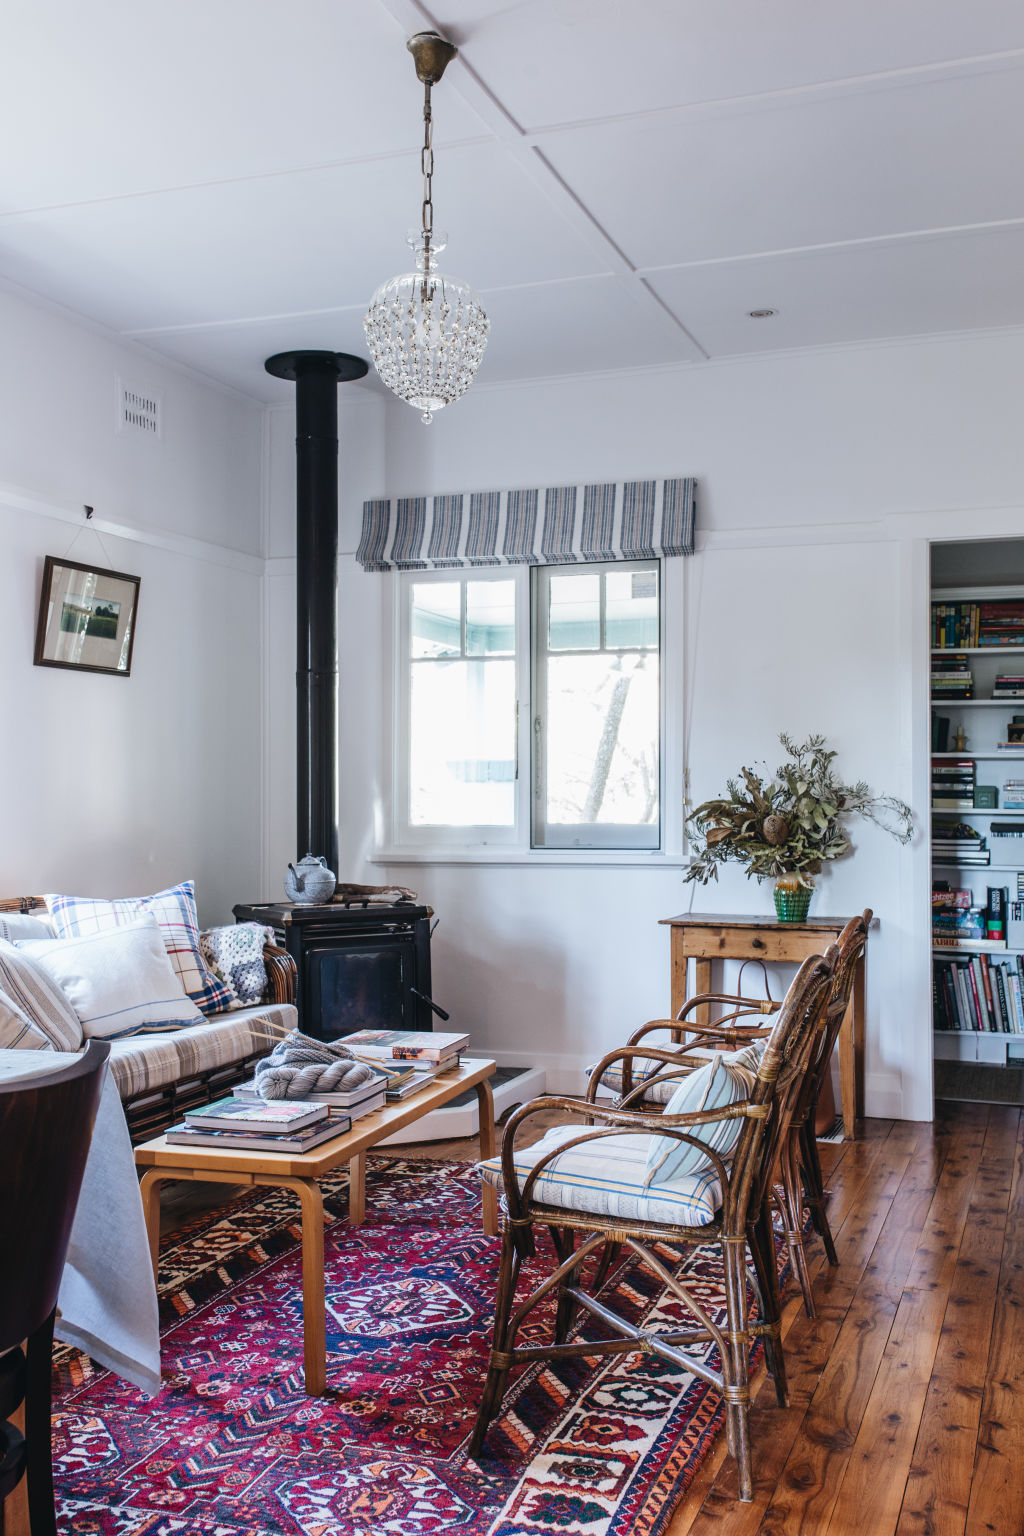 A space to enjoy the simple things in life. Photo: Abbie Melle